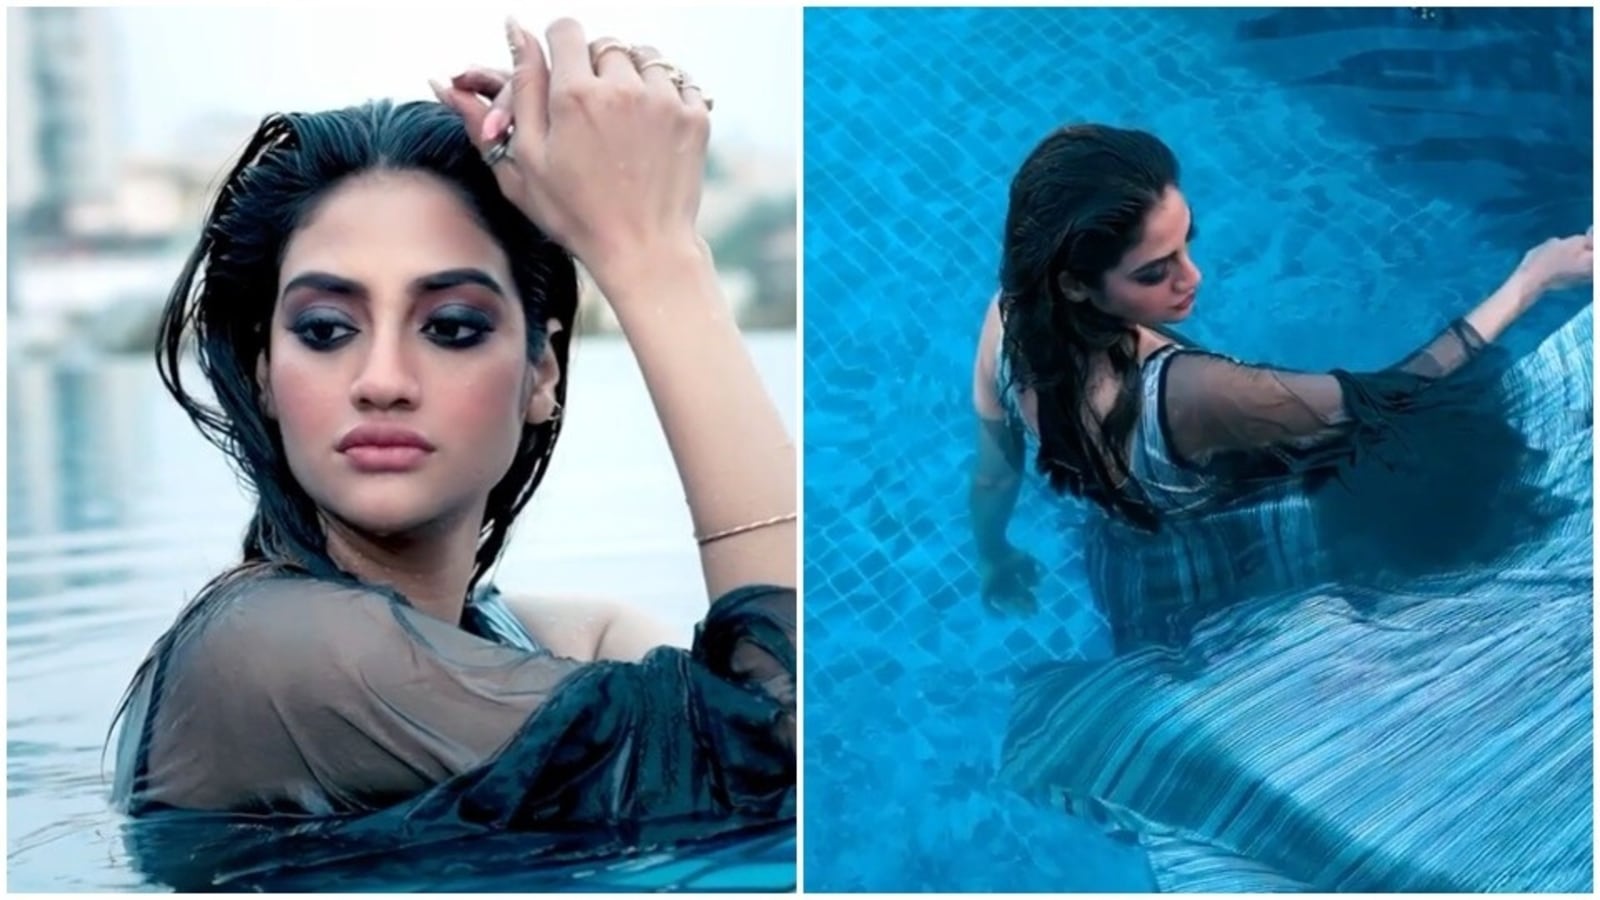 1600px x 900px - Pregnant Nusrat Jahan takes a dip in pool for photoshoot, promotes  contraceptive pills on Instagram - Hindustan Times